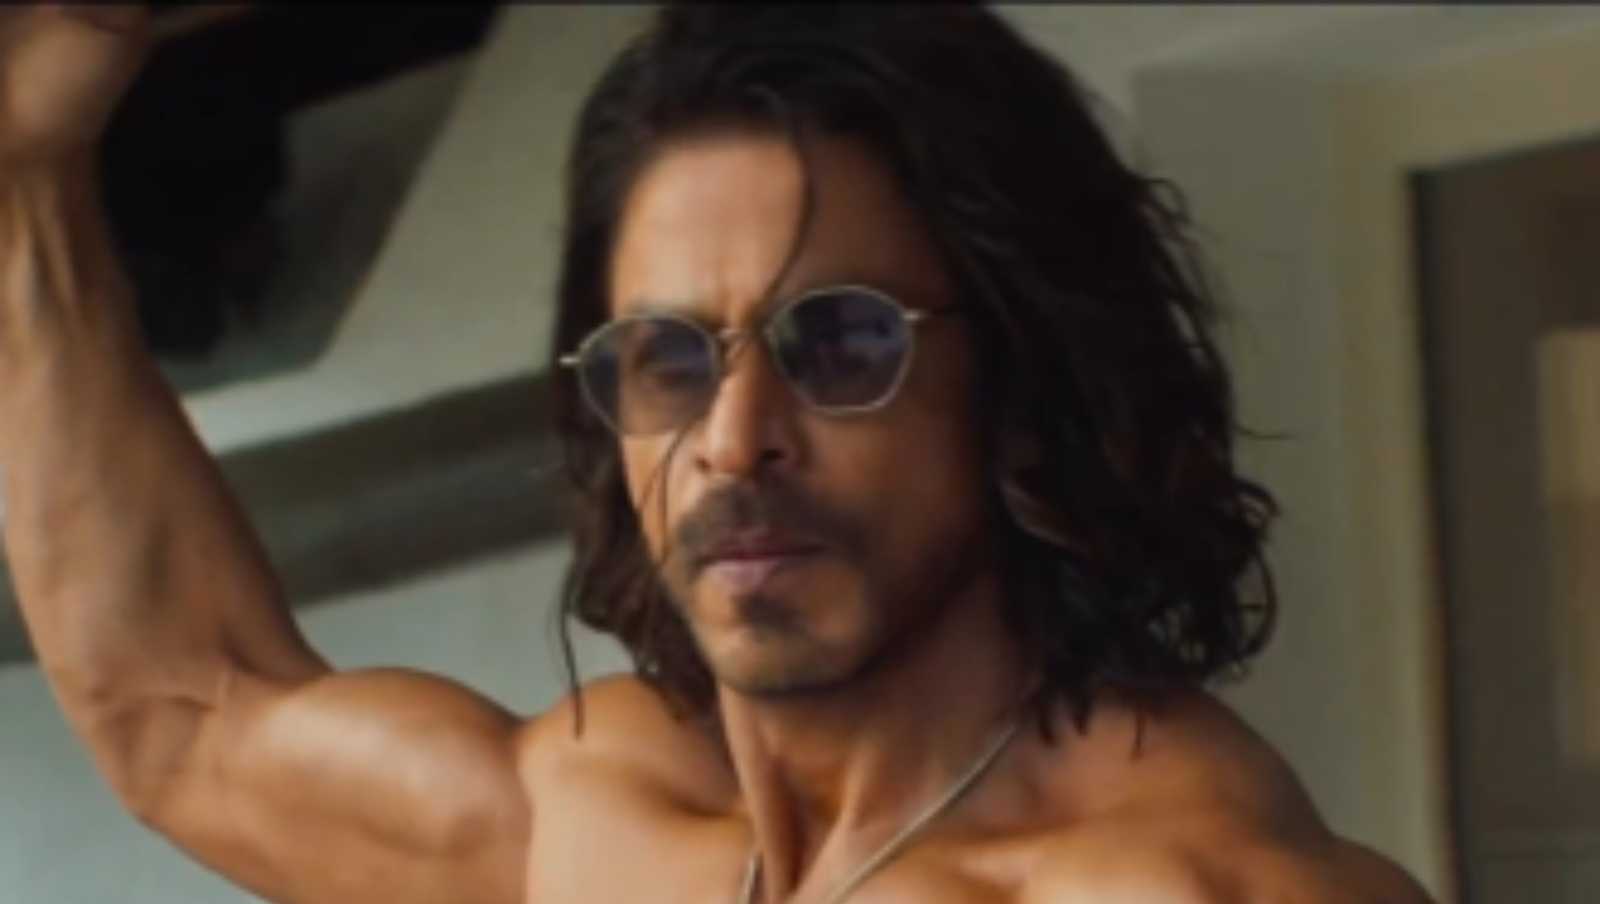 Pathaan Shah Rukh Khan's drool-worthy physique at 57 in Besharam Rang has left fans in a daze